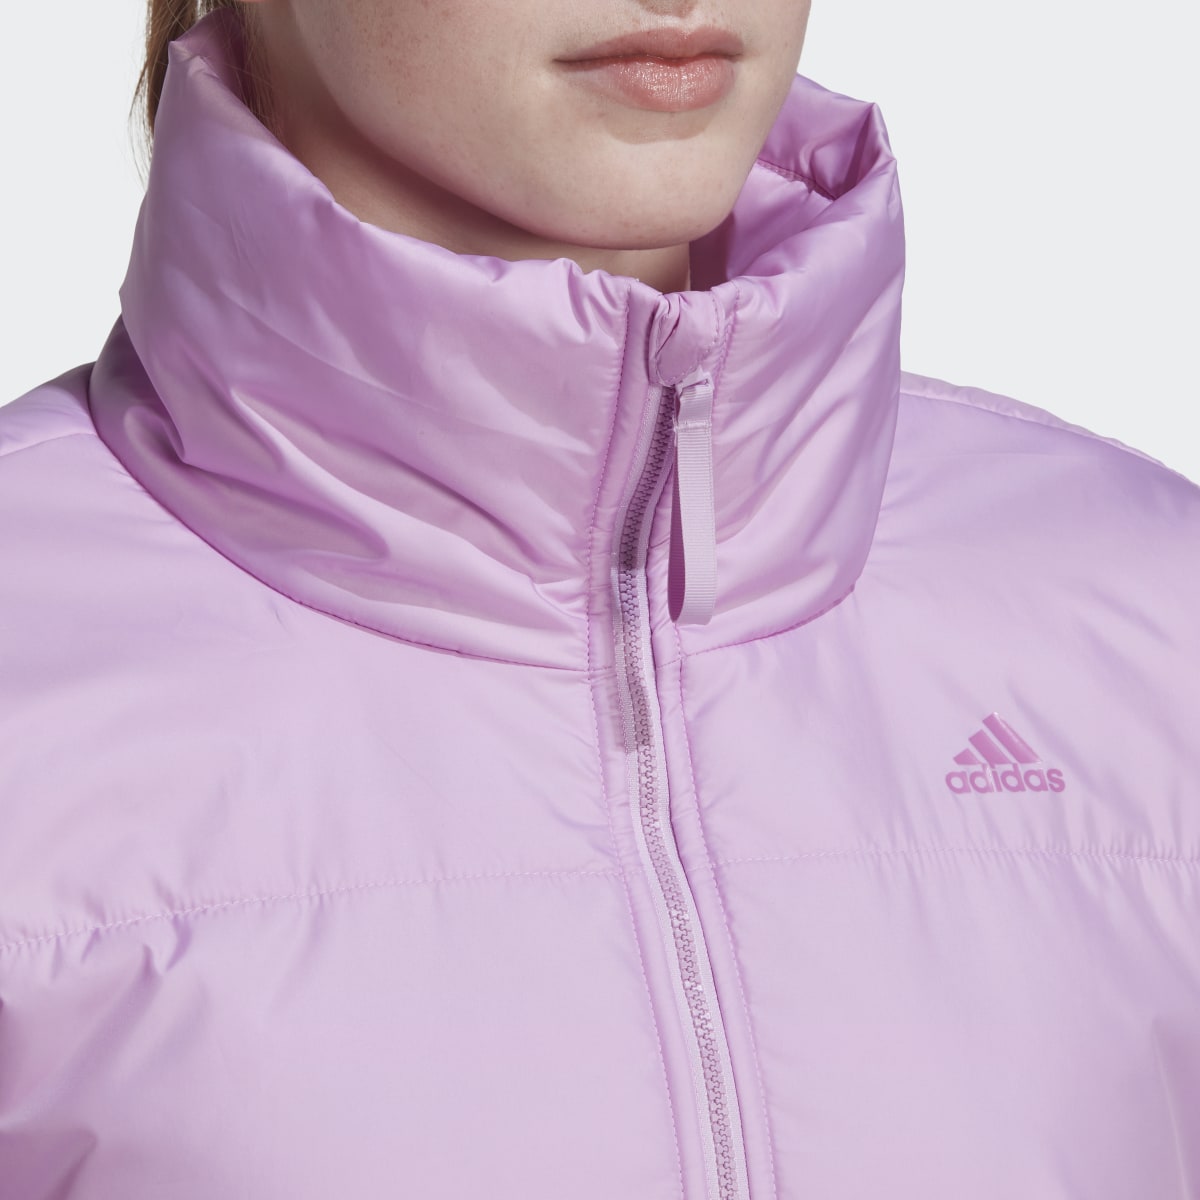 Adidas BSC Insulated Jacket. 9